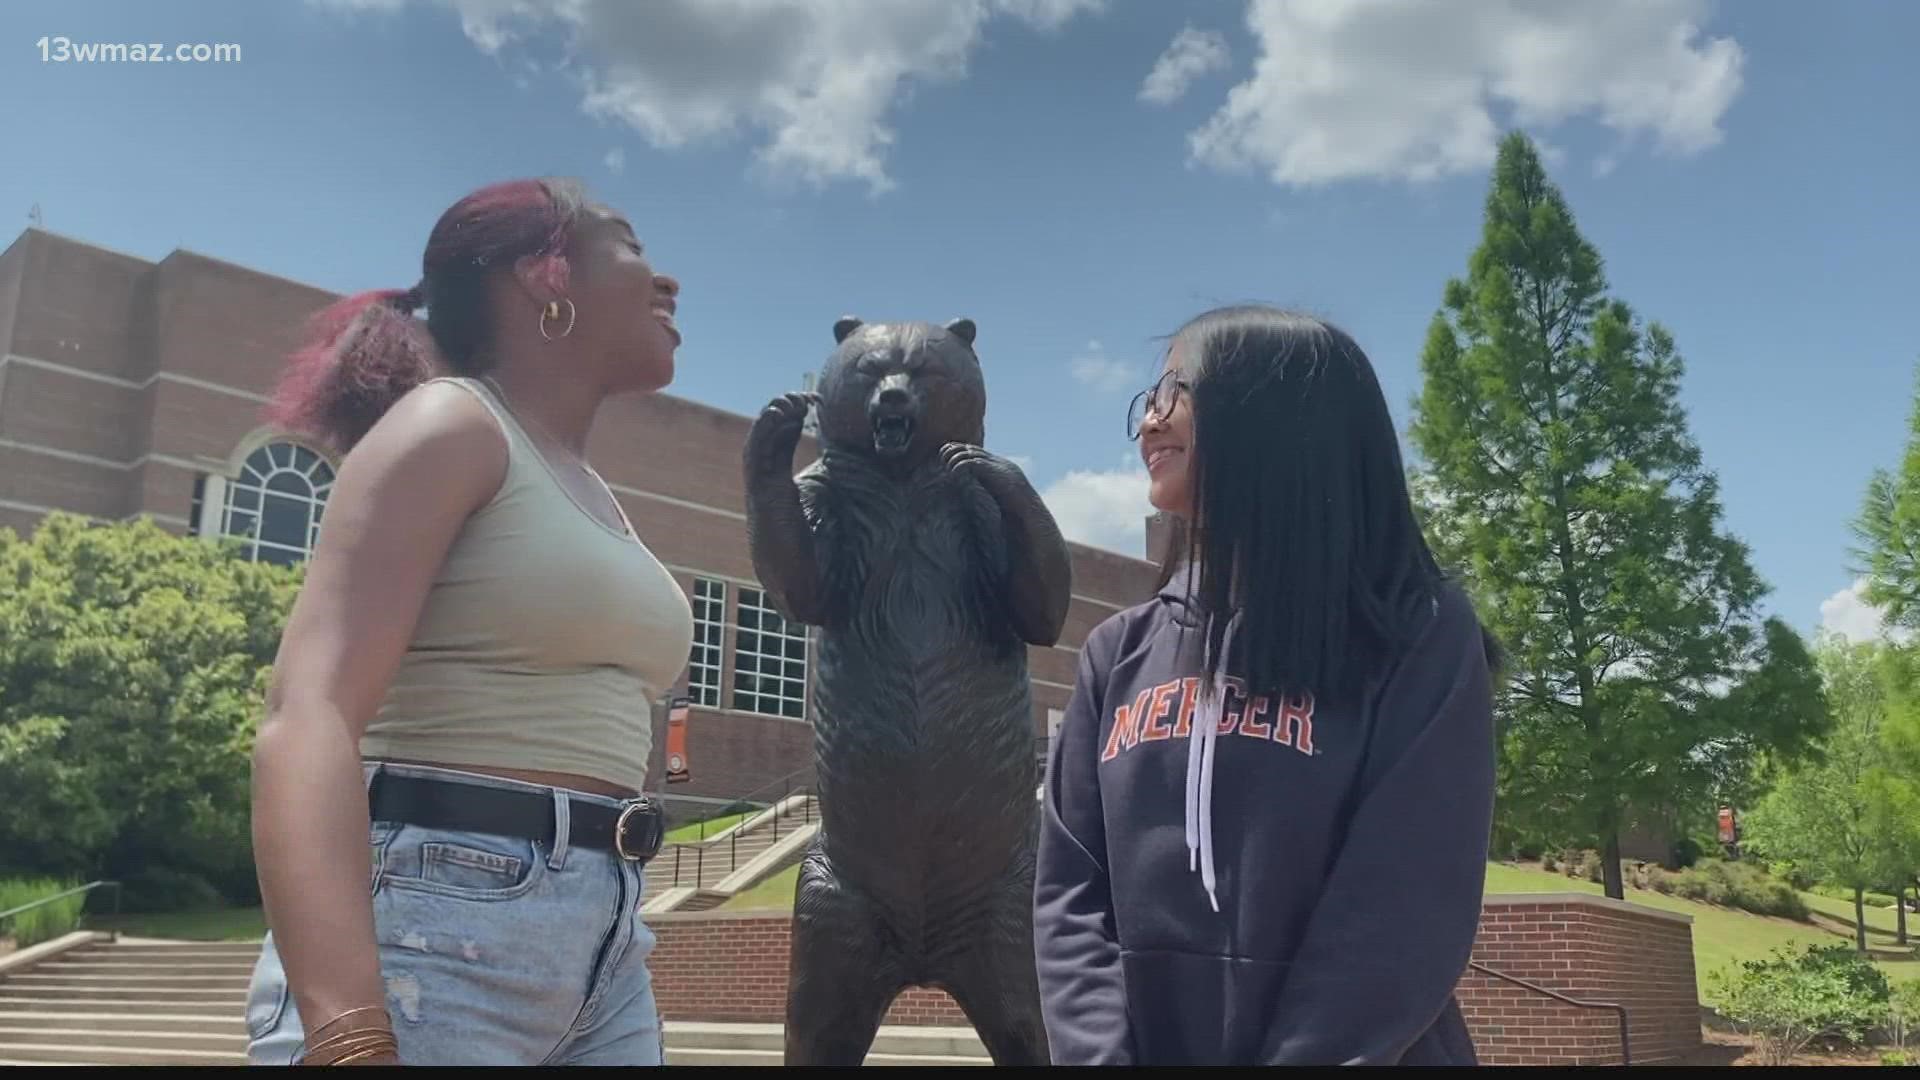 Graduating senior Mikayla Alves will receive a full ride for her masters program, while sophomore Alyssa Bonifacio will receive a full ride as an undergrad.